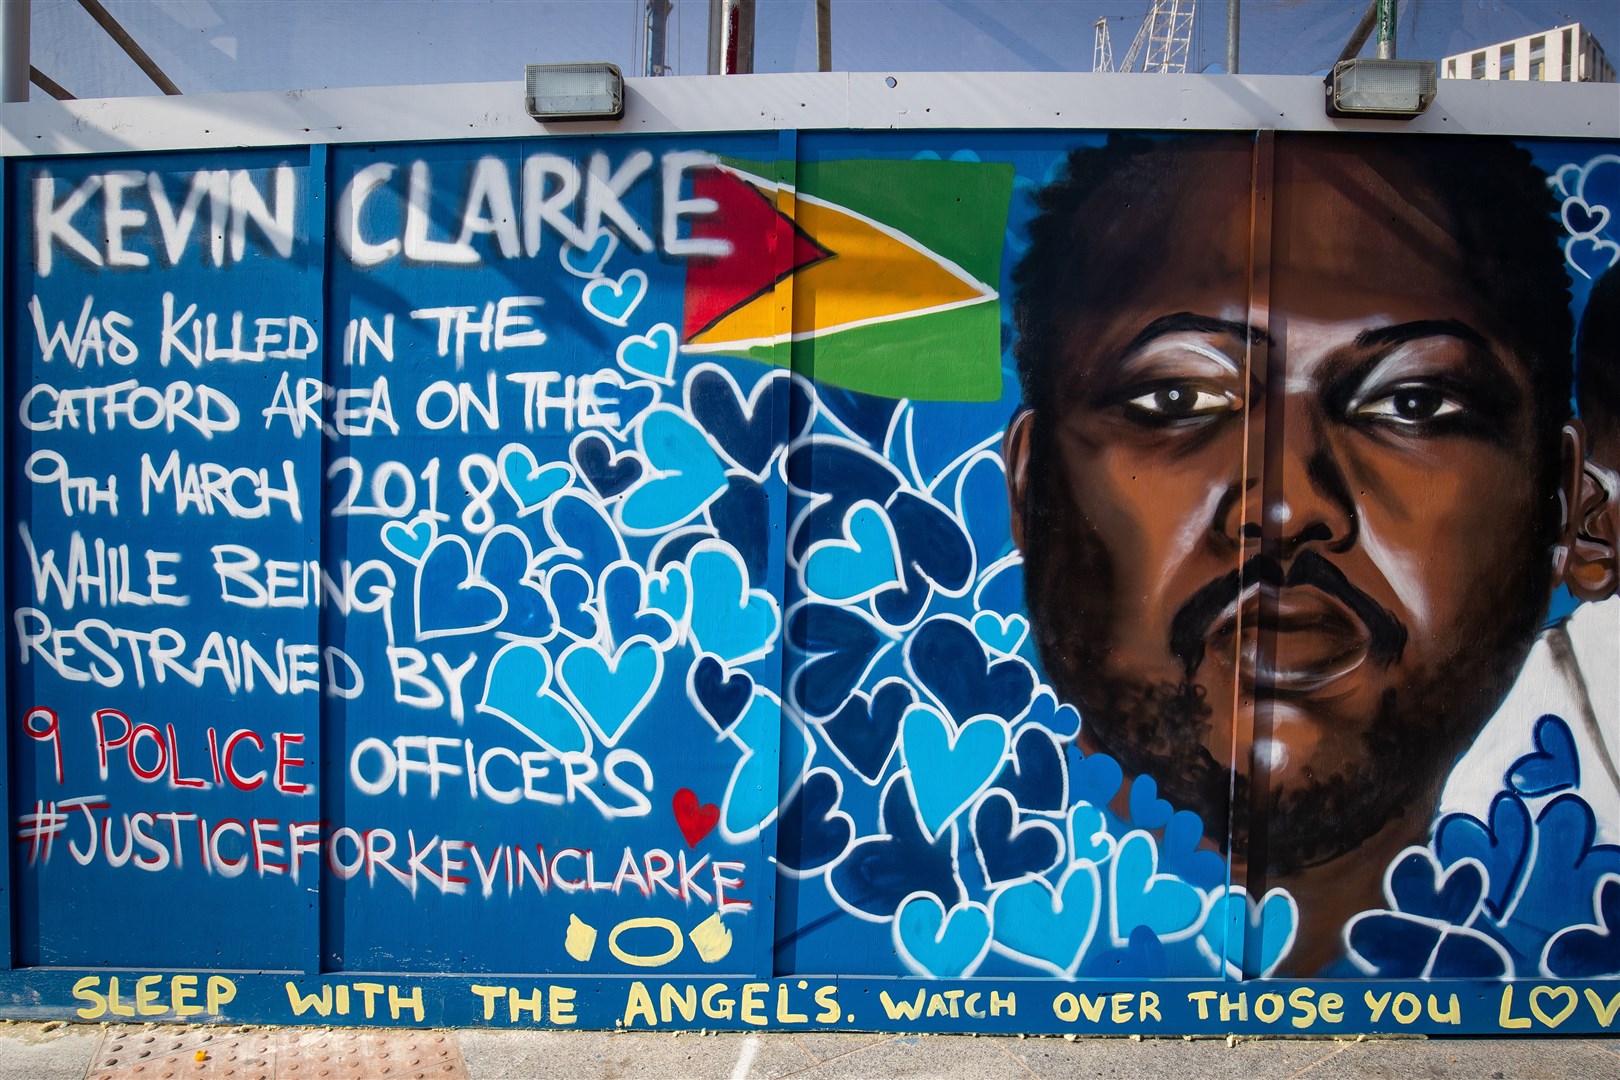 A mural commemorating Kevin Clarke (Aaron Chown/PA)